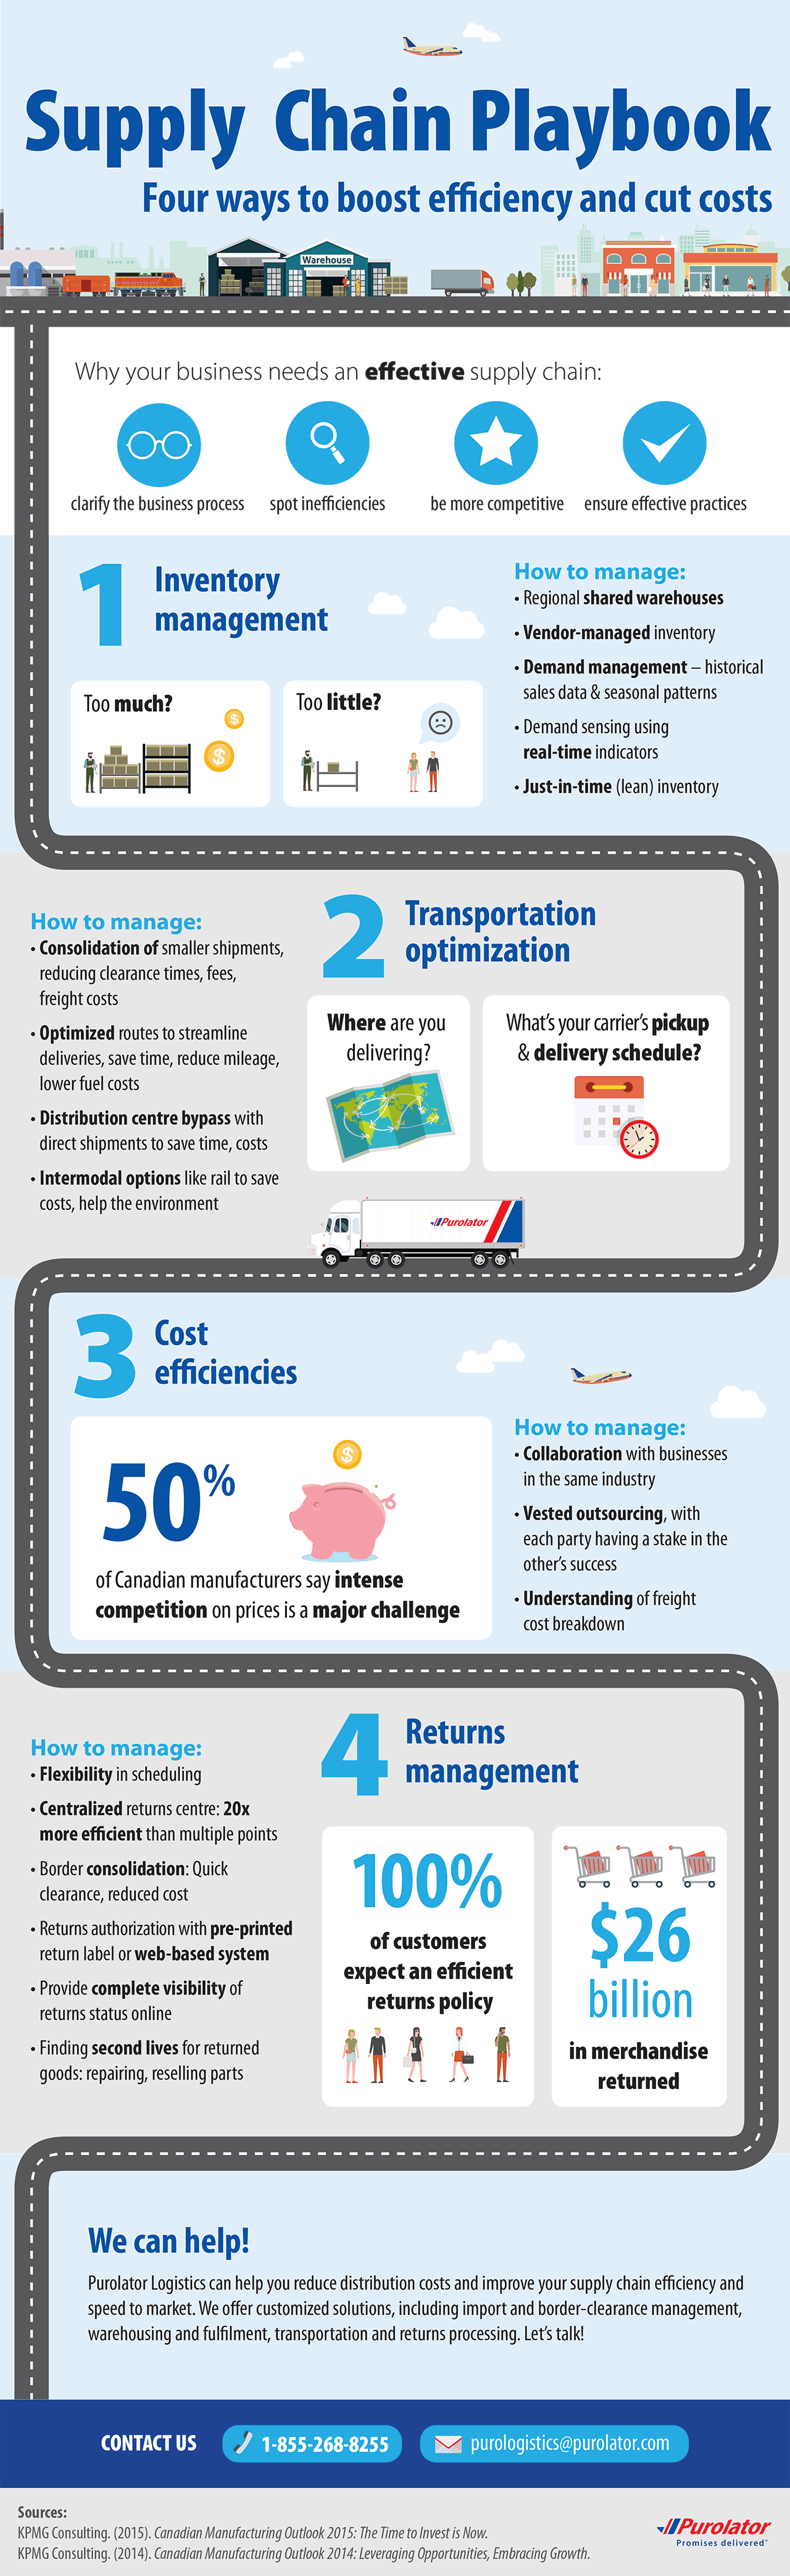 Supply Chain Playbook: 4 Ways to Boost Efficiency and Cut Costs Infographic